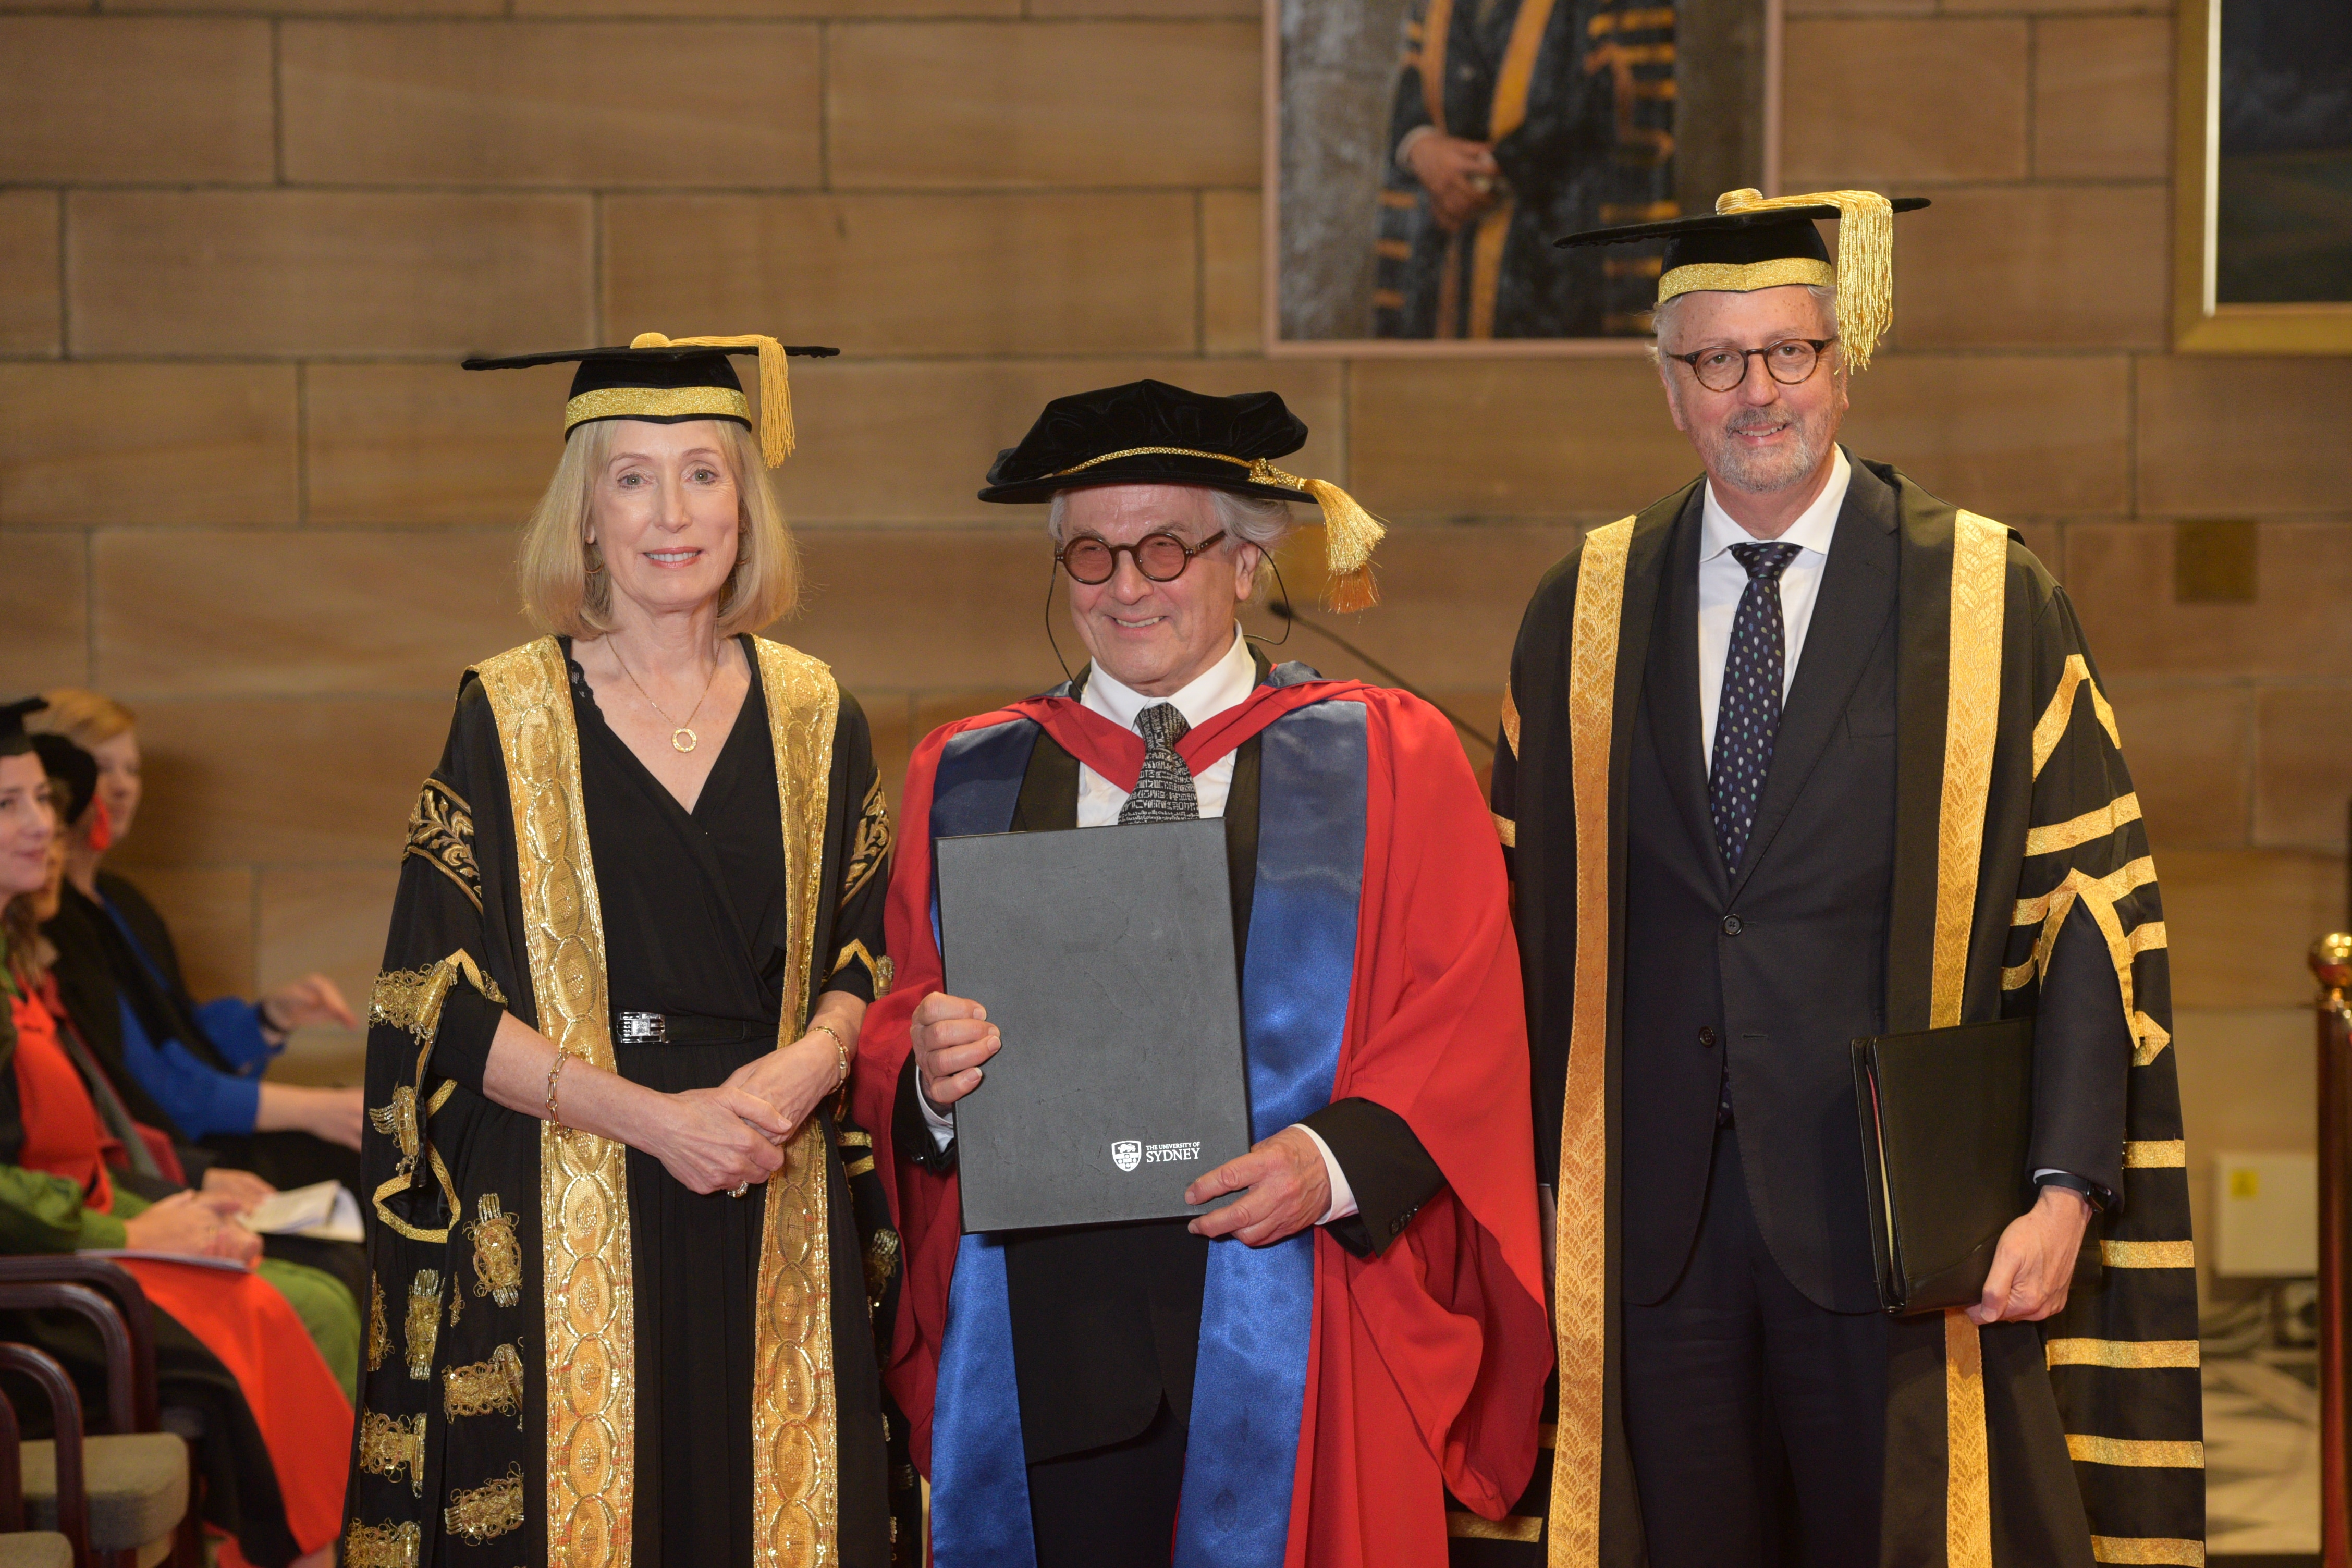 Mad Max director George Miller admitted to the degree of Doctor of Letters by the University of Sydney